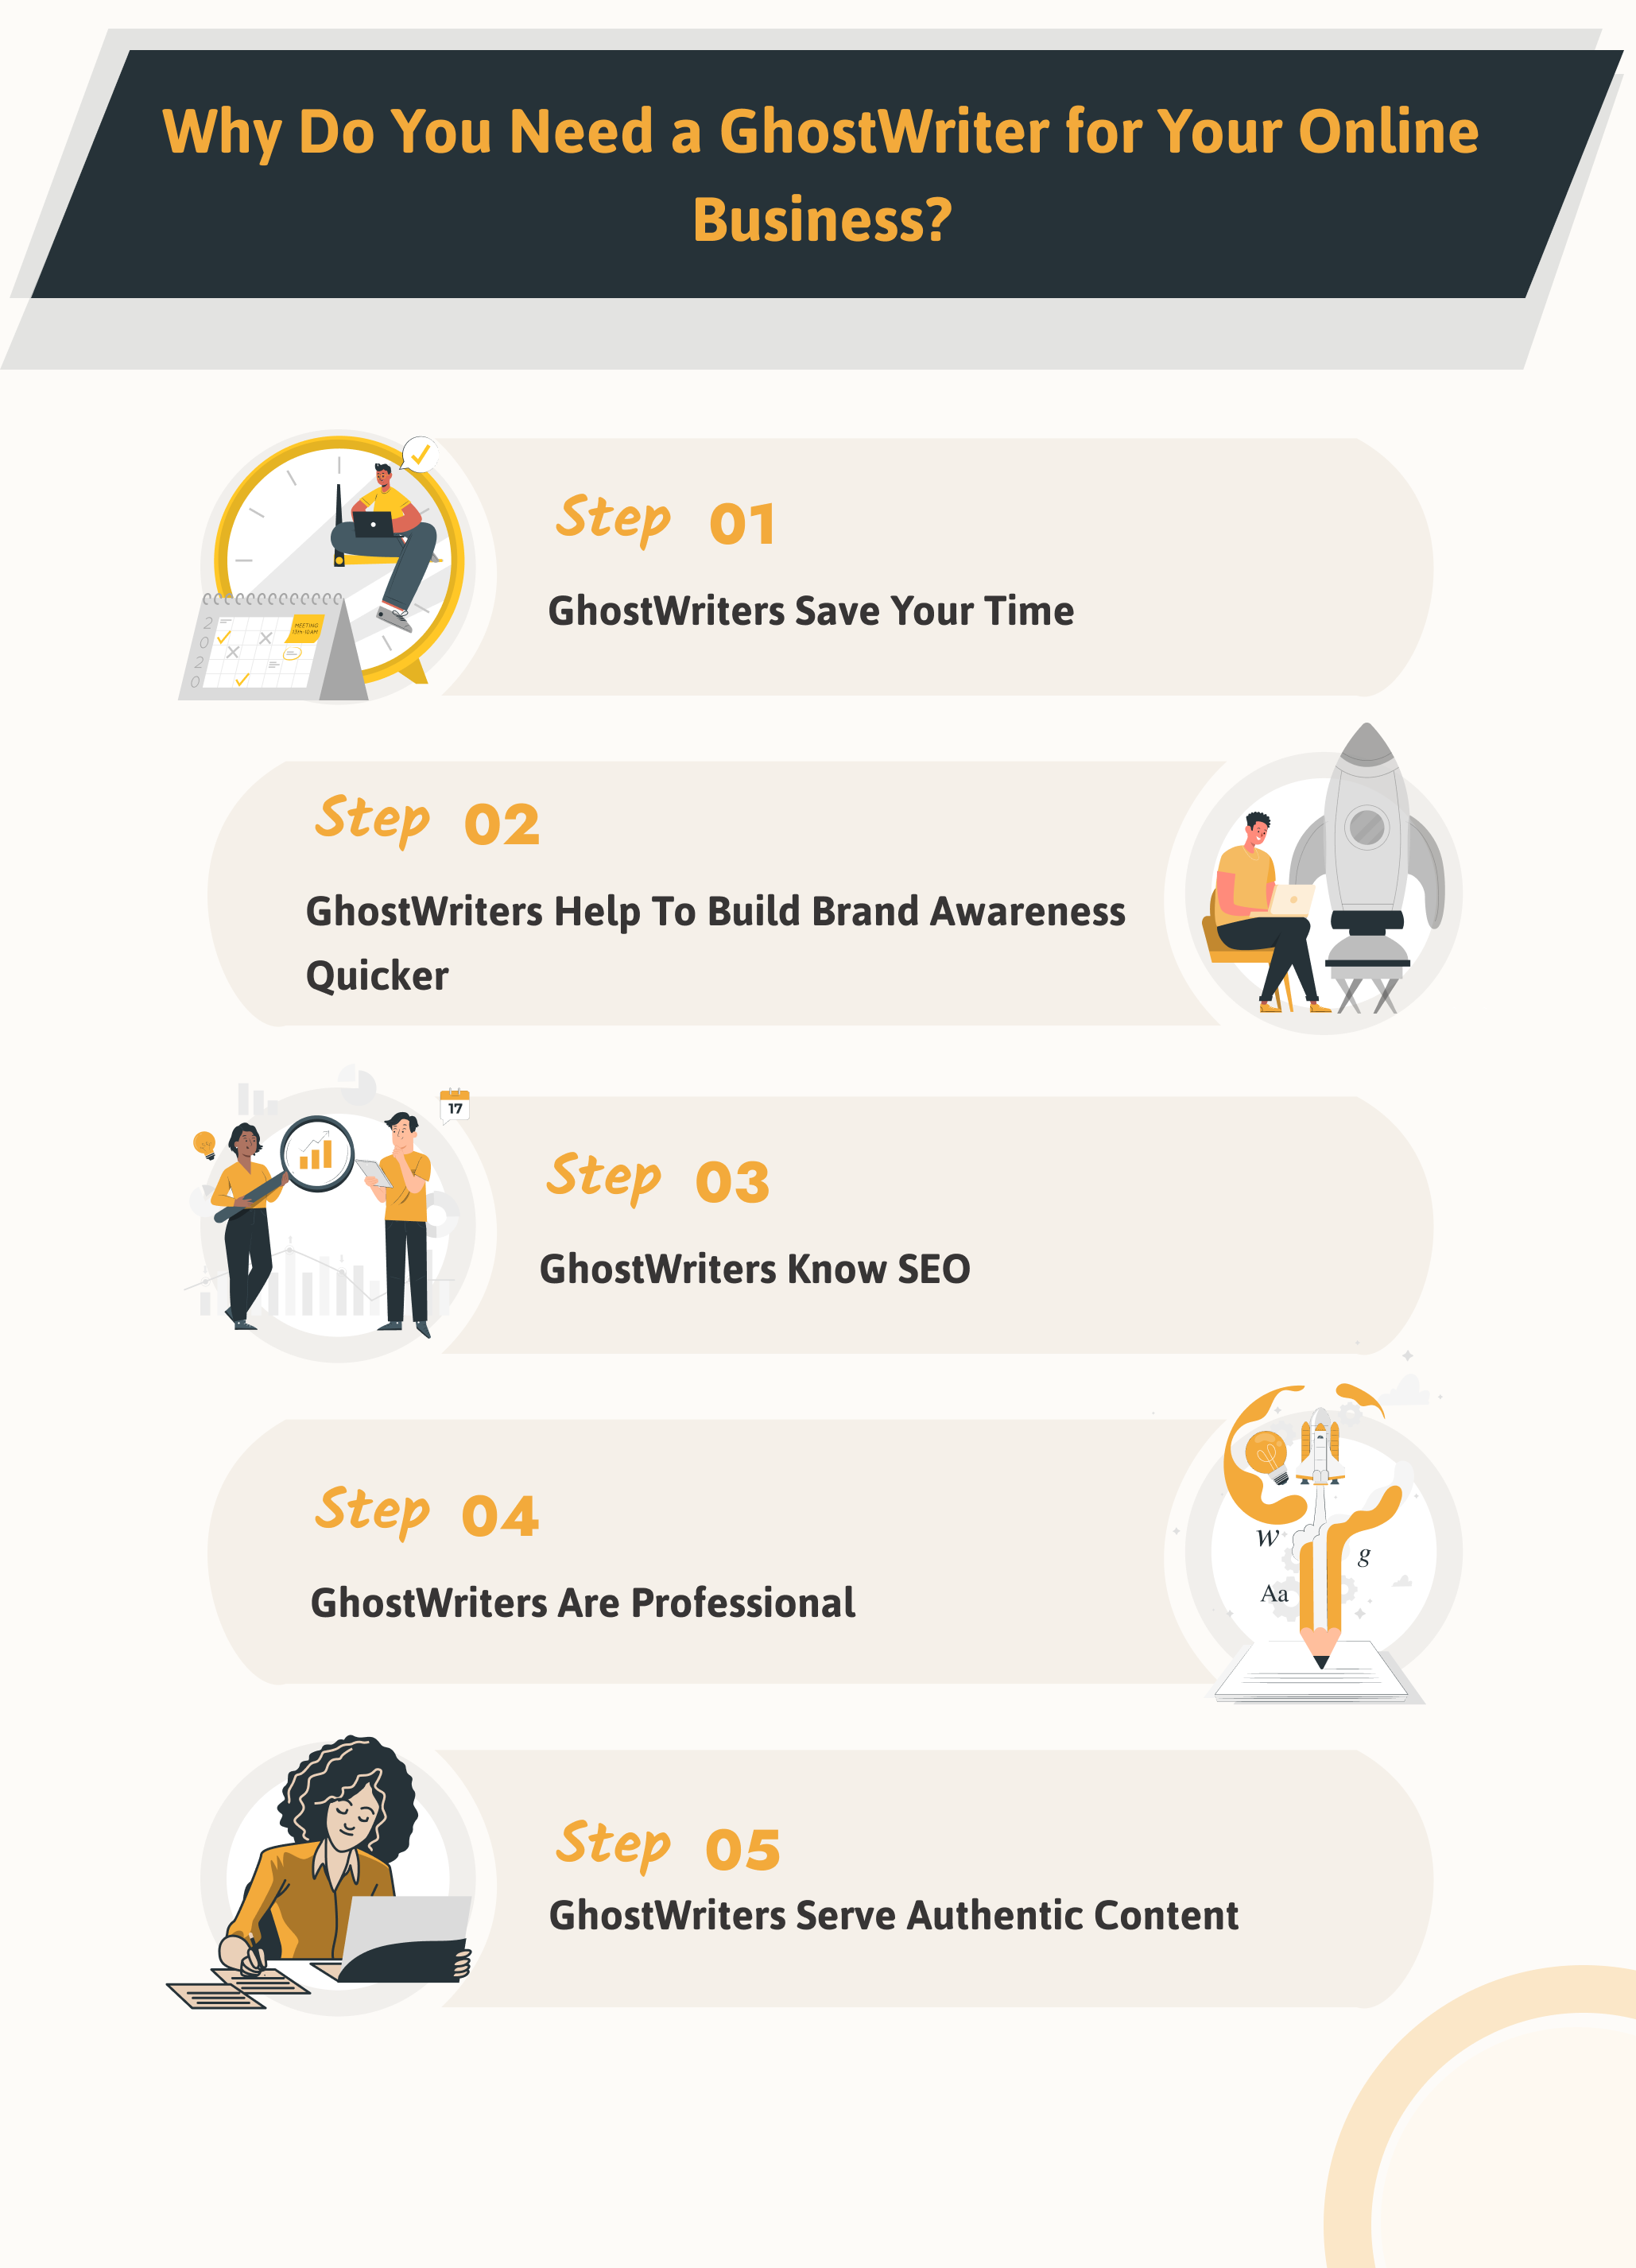 Need a ghostwriter for your online business - Infographic